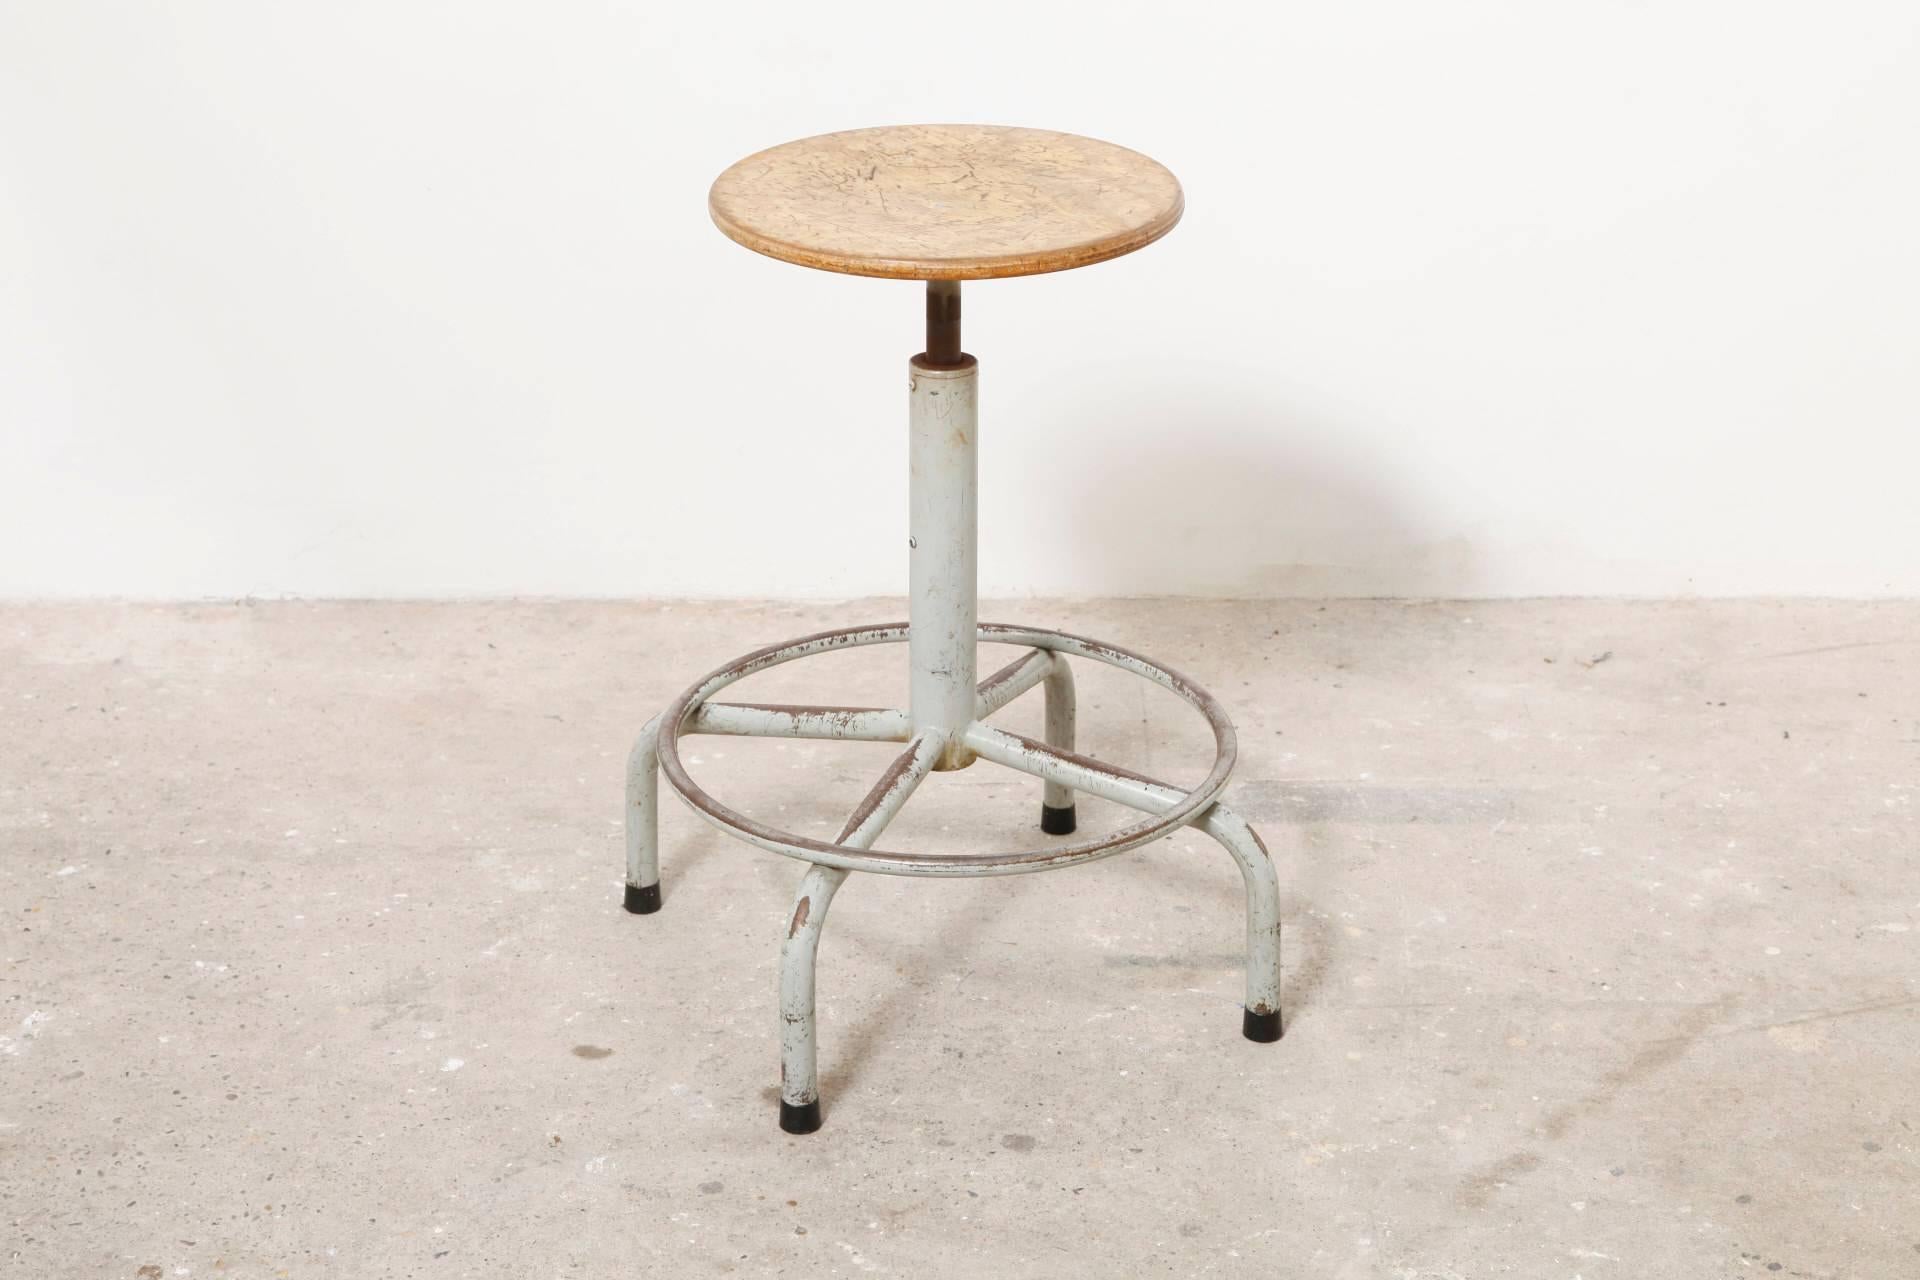 Beautiful rare set of six enameled metal tube and beech seat drafting stools. 

Adjustable height, foot rests and pedestal base with wide spread feet.
All good original condition with visible signs of wear and enamel loss.
Just very beautiful in